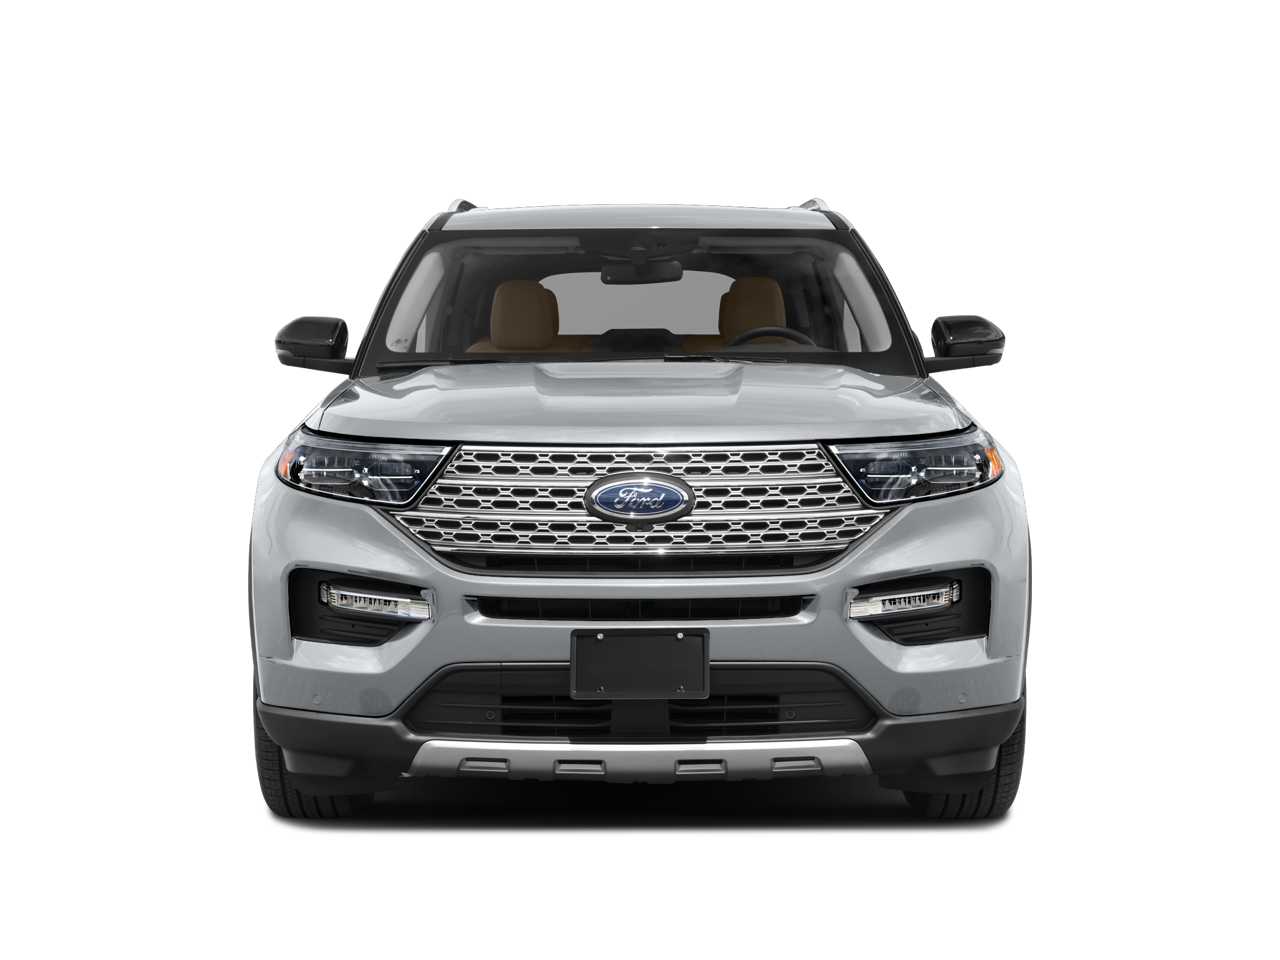 2020 Ford Explorer Limited 4X4